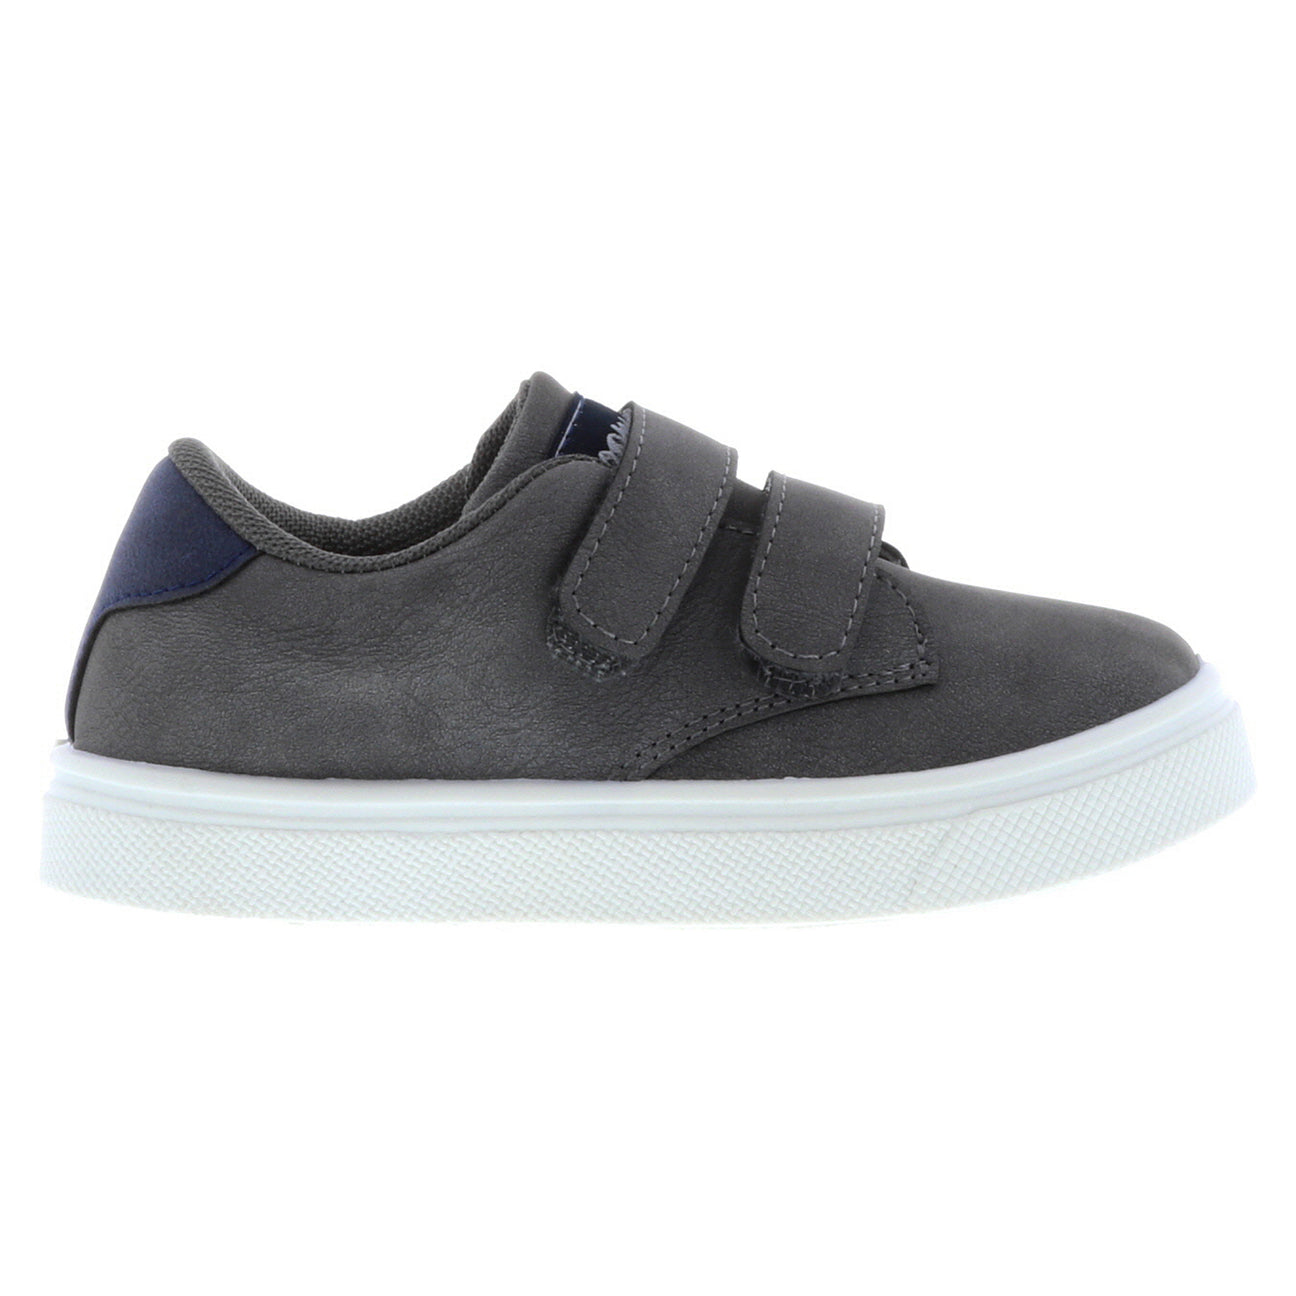 Jack Low Profile Sneaker | Charcoal PU Leather